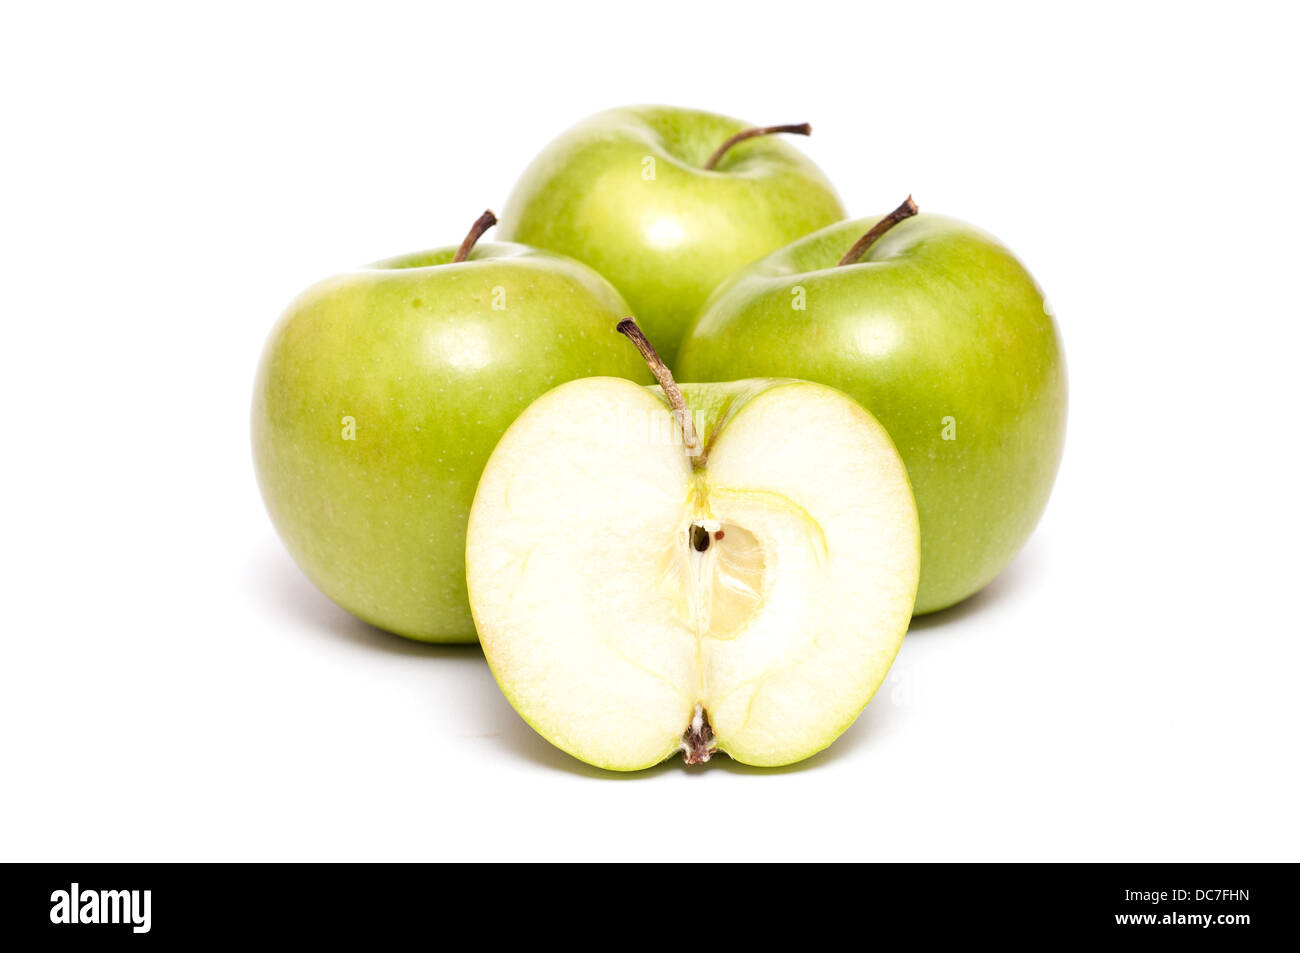 Four apples on a white background and one is sliced Stock Photo